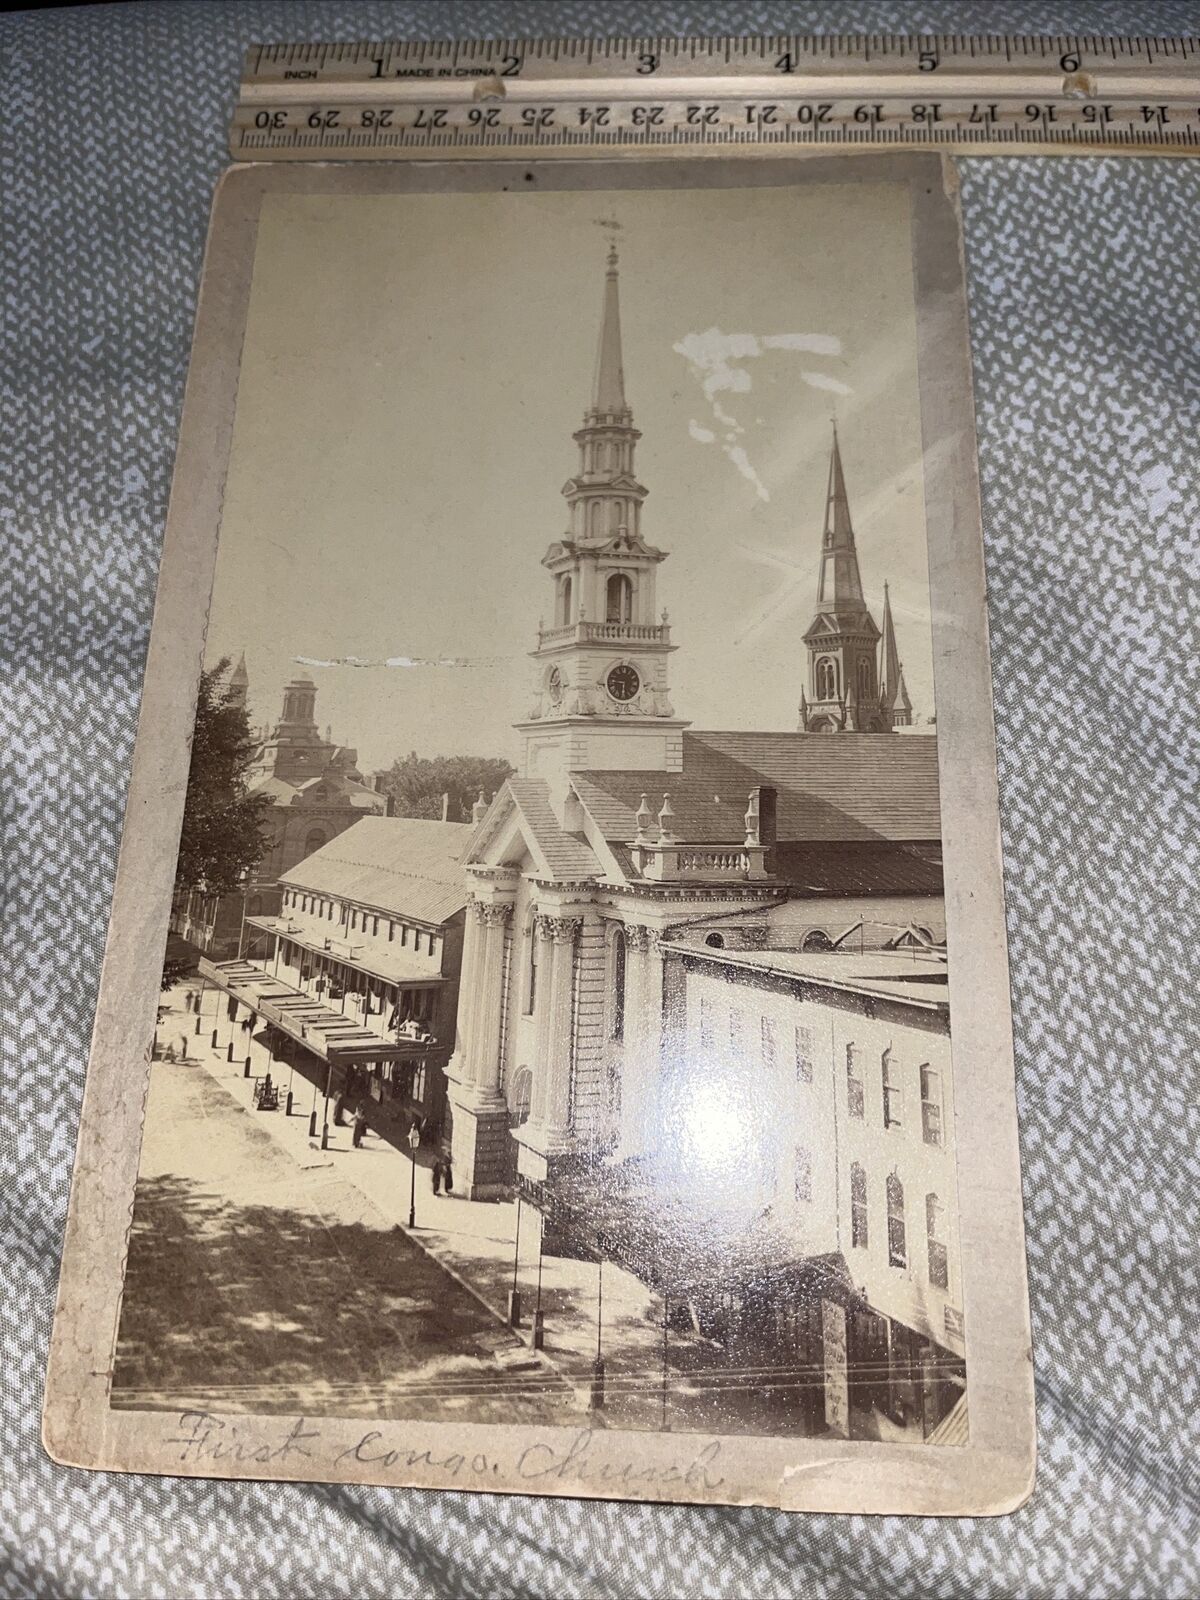 Antique Cabinet Card Photograph First Congregational Church Keene NH Square